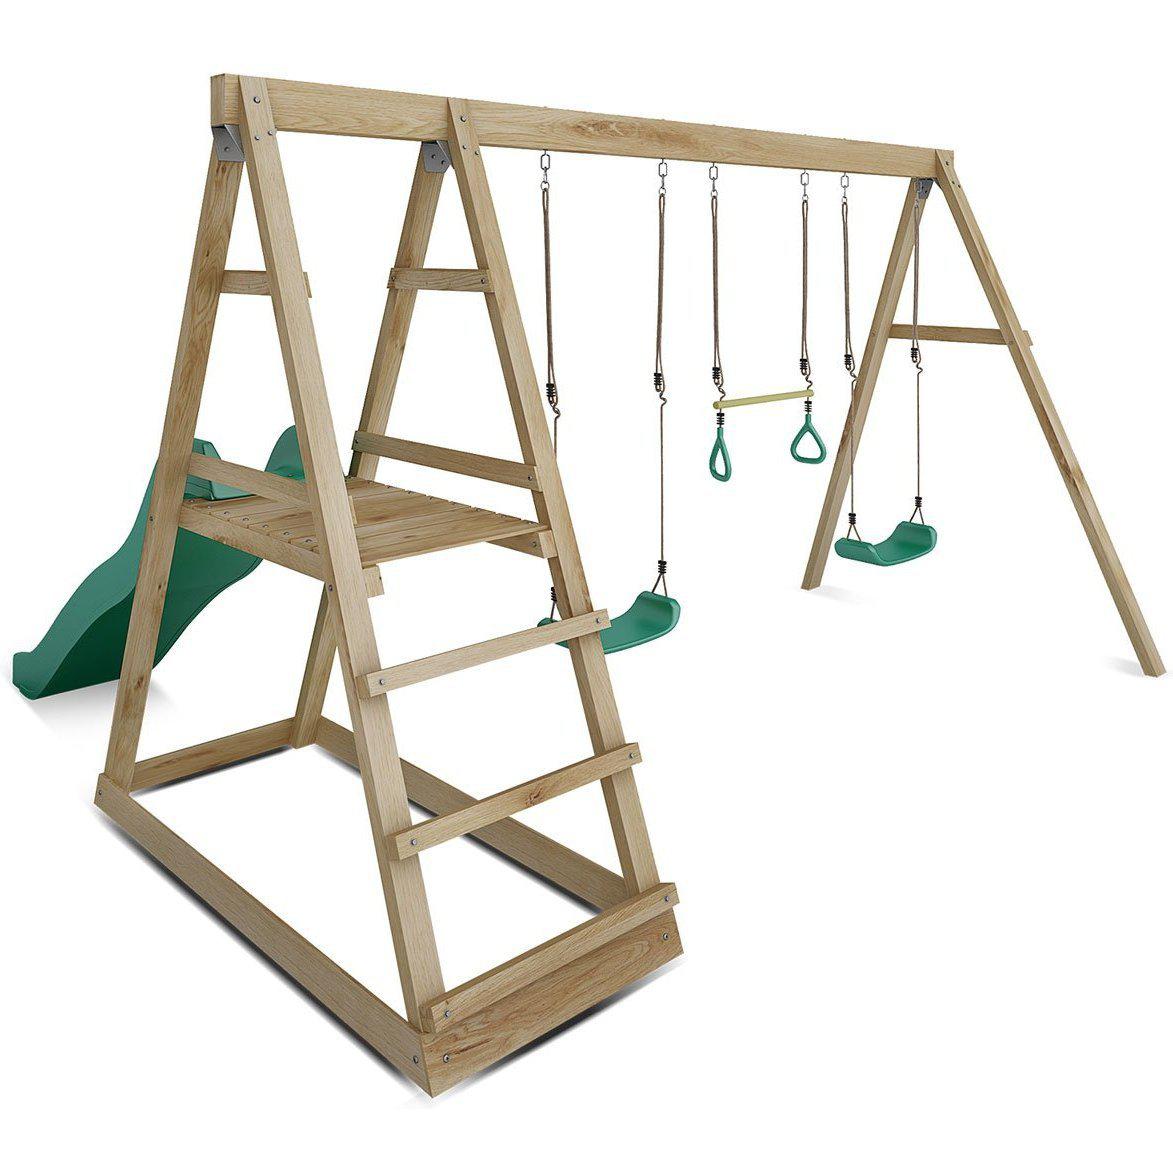 Afterpay Buy Now Pay Later Buy Winston 4 Station Timber Swing Set with Slide Australia 